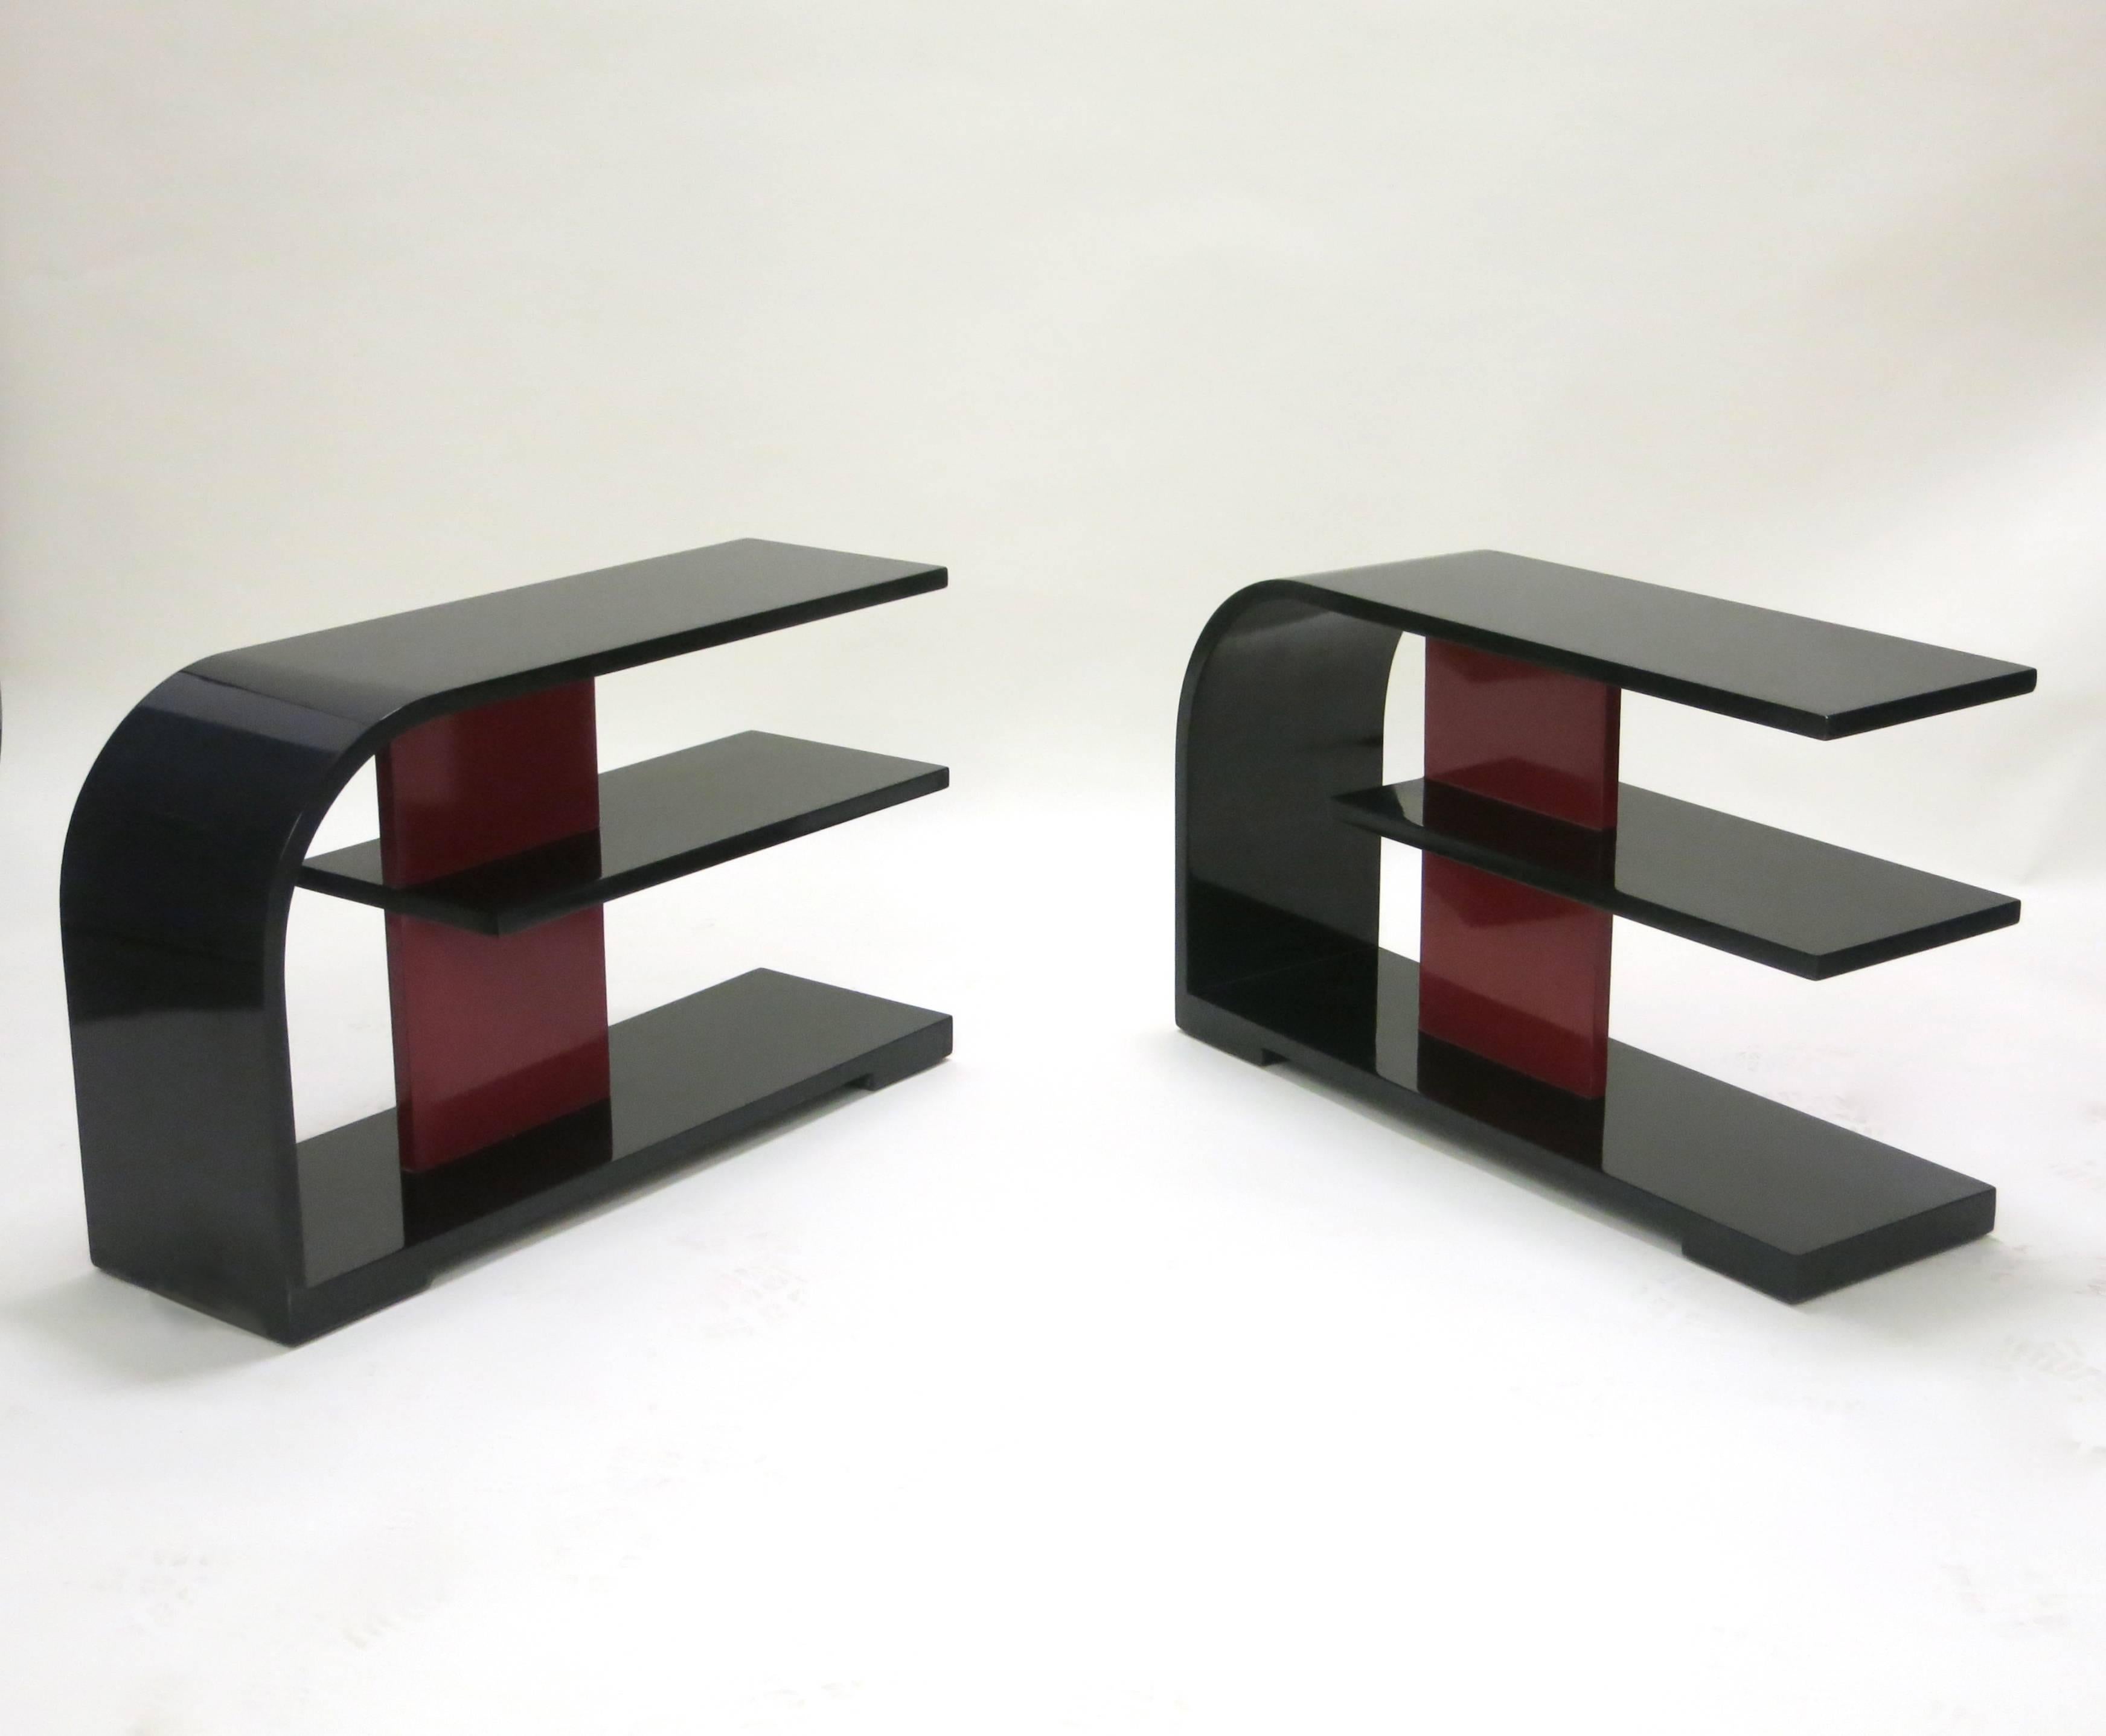 Pair of tri-level side tables refinished in black lacquer and red lacquer detail. The top shelf bends to form the back connecting to the lower shelf that acts as the base having a support at each corner.